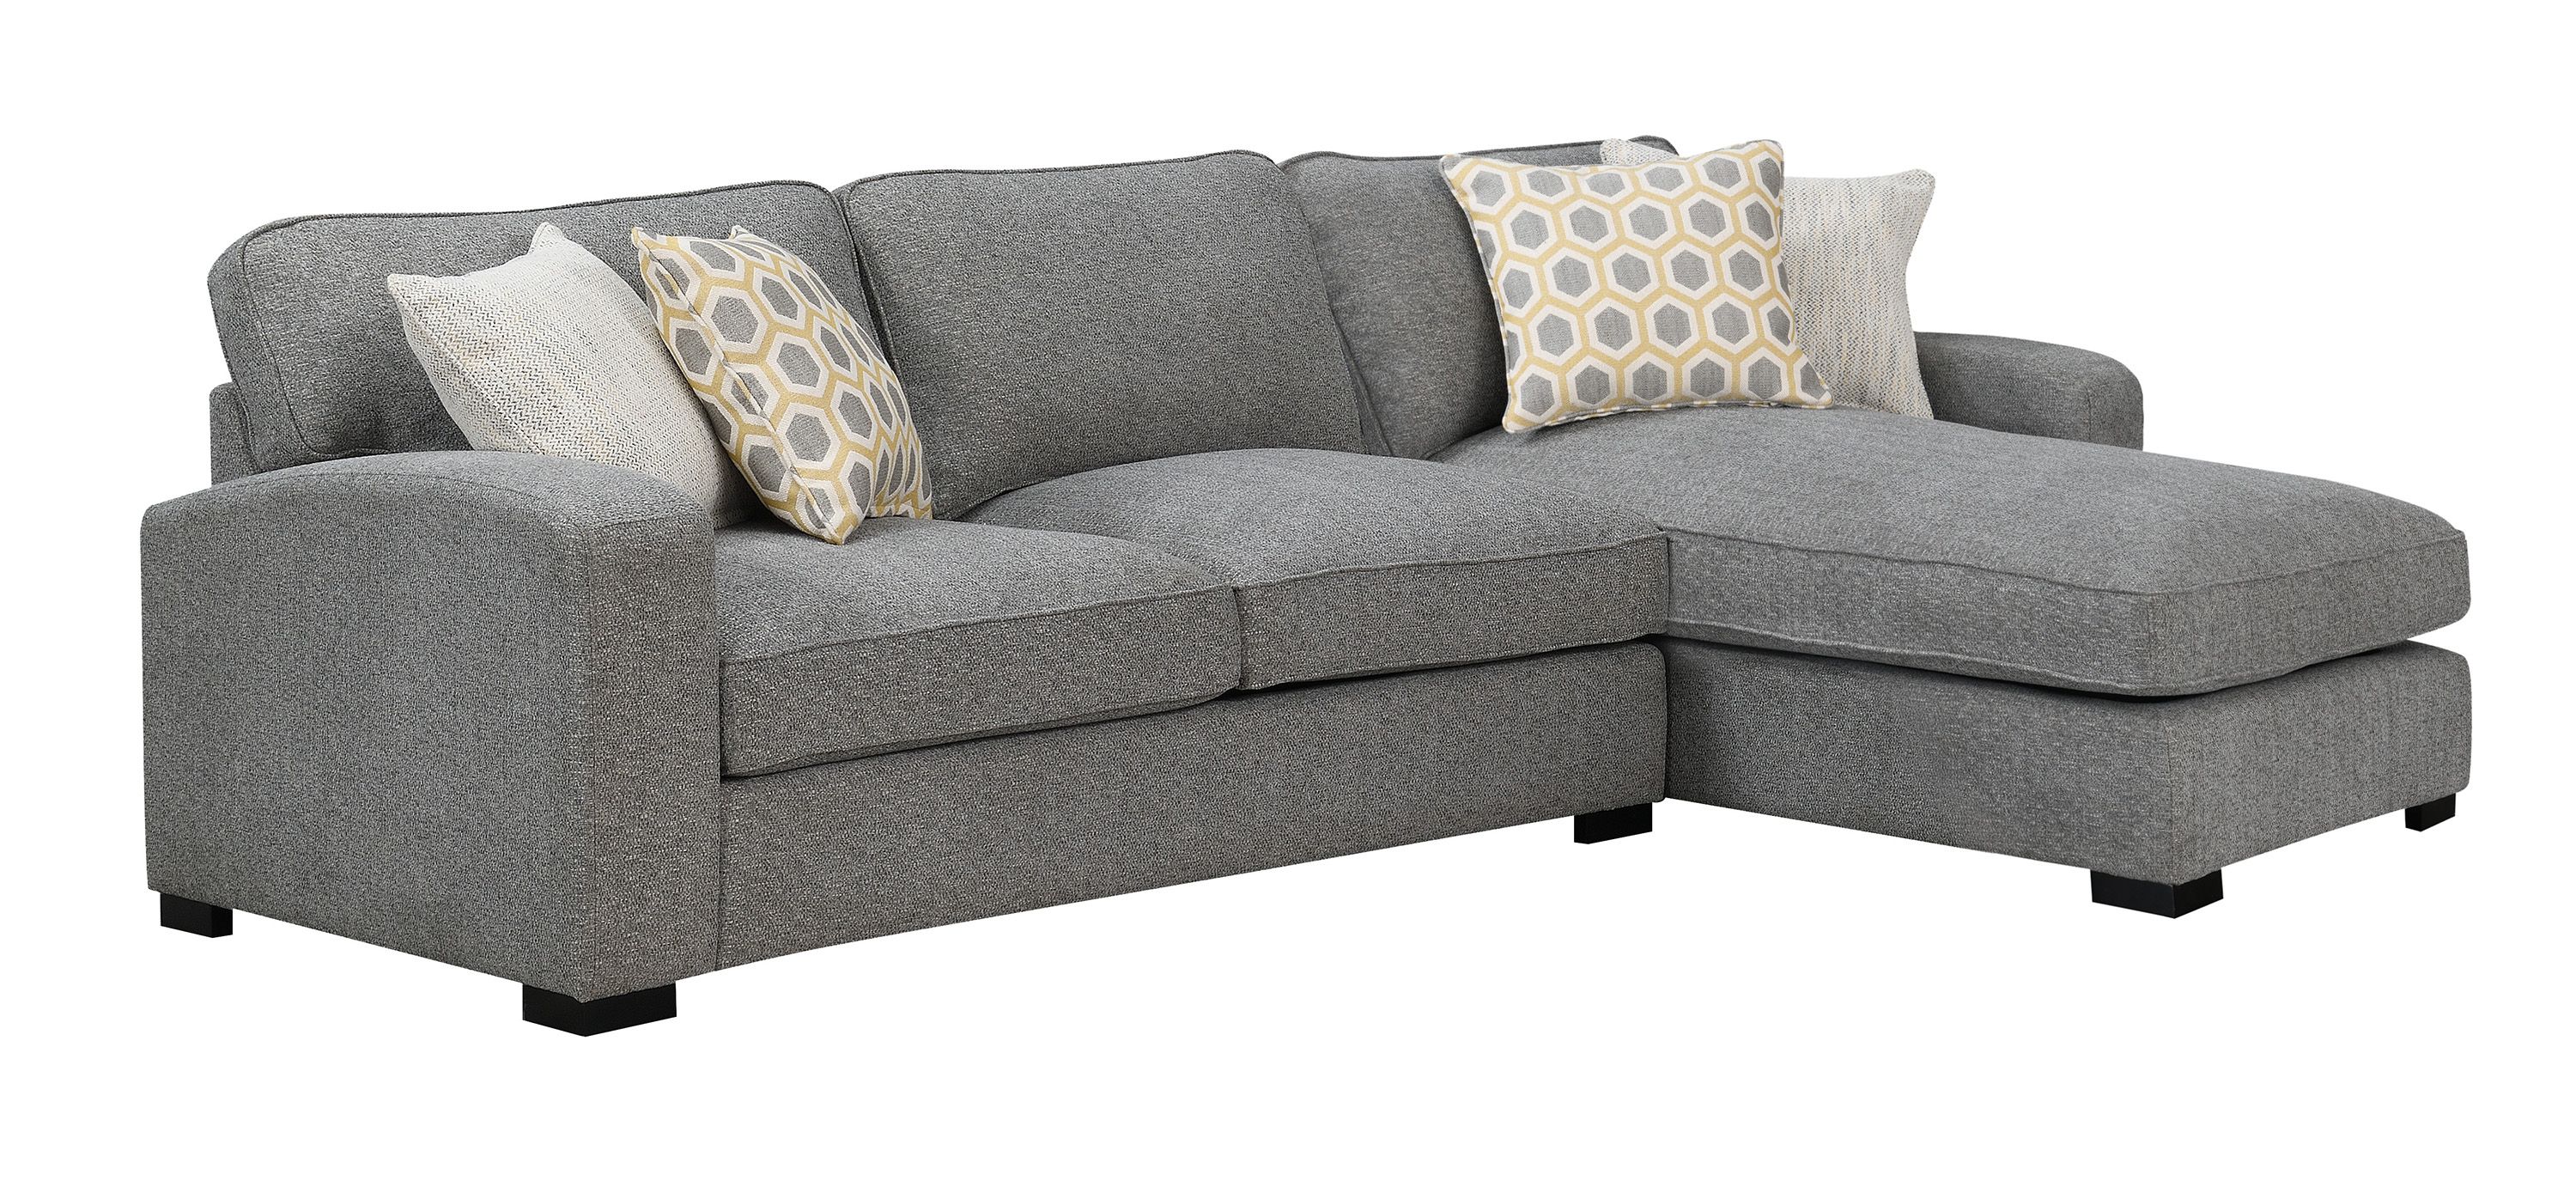 Repose Chaise Sectional